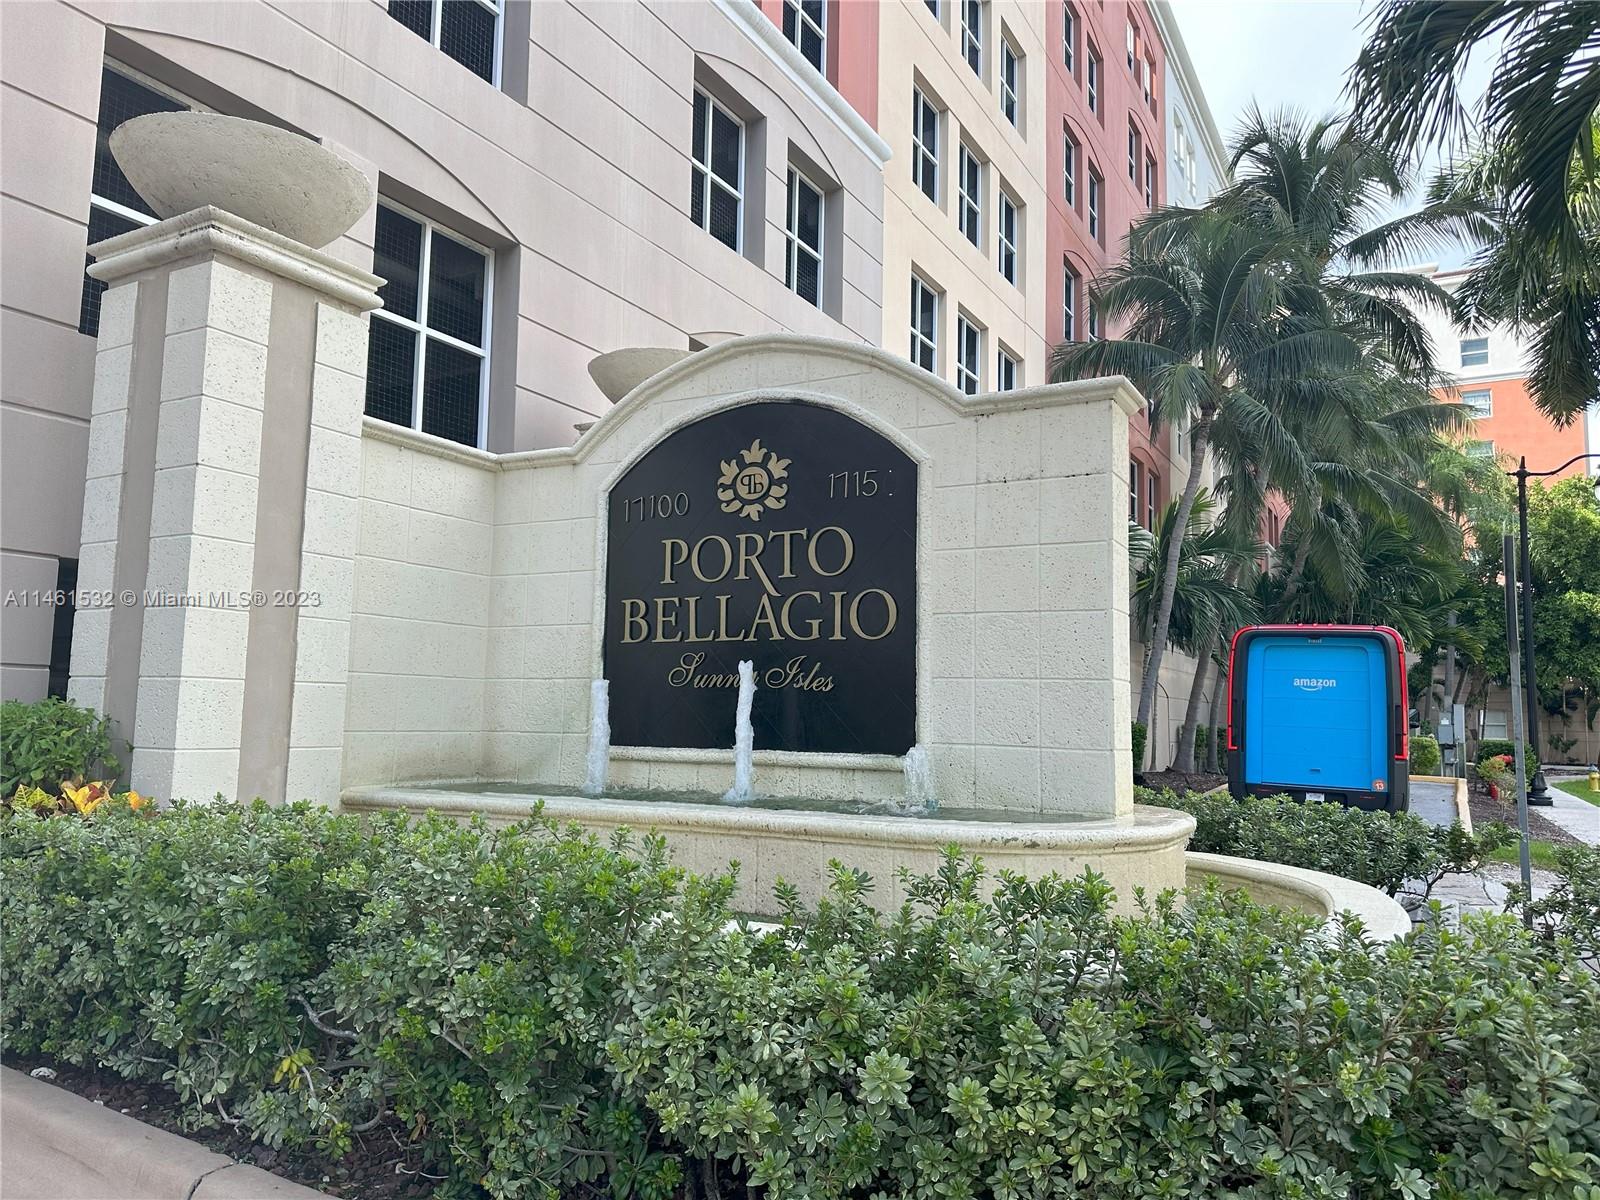 17150 N Bay Rd 2319, Sunny Isles Beach, Florida 33160, 1 Bedroom Bedrooms, ,1 BathroomBathrooms,Residential,For Sale,17150 N Bay Rd 2319,A11461532